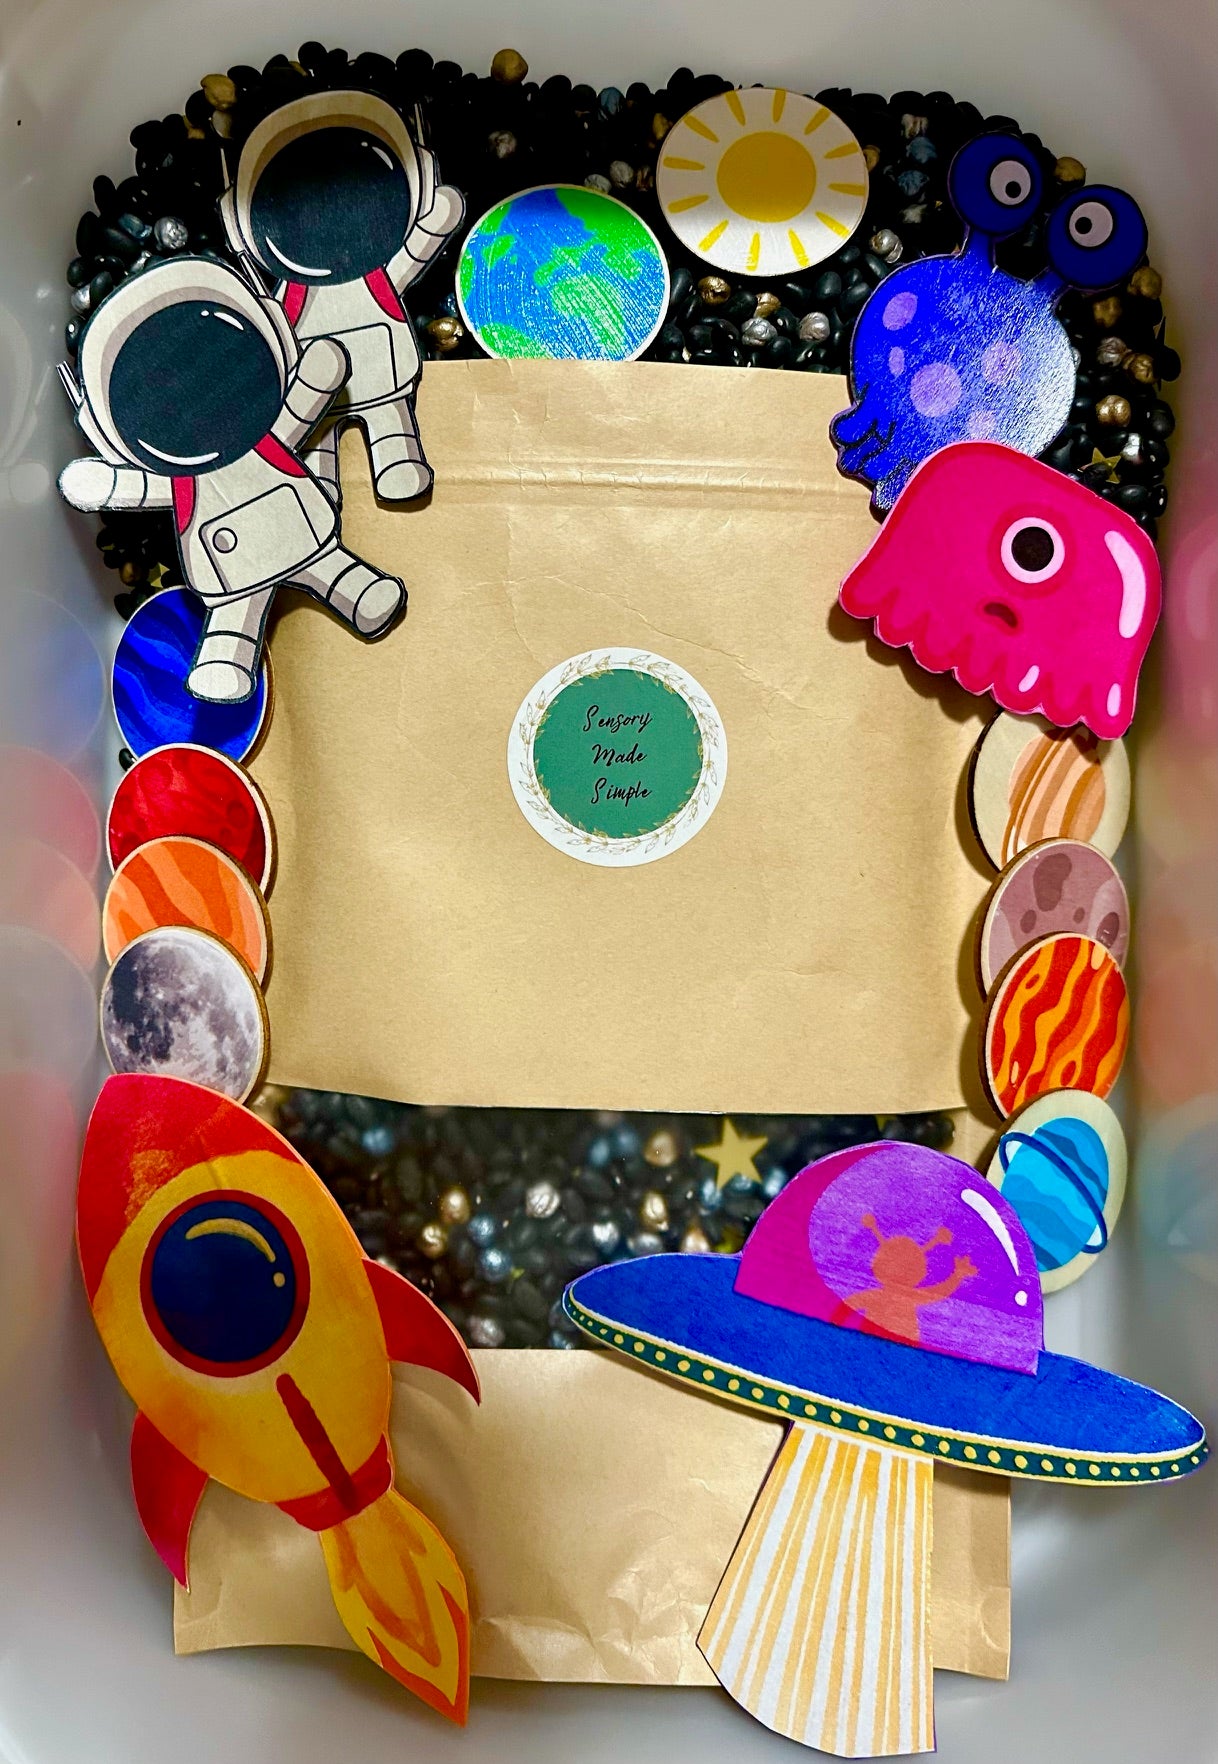 Space Adventure Kit by Sensory Made Simple